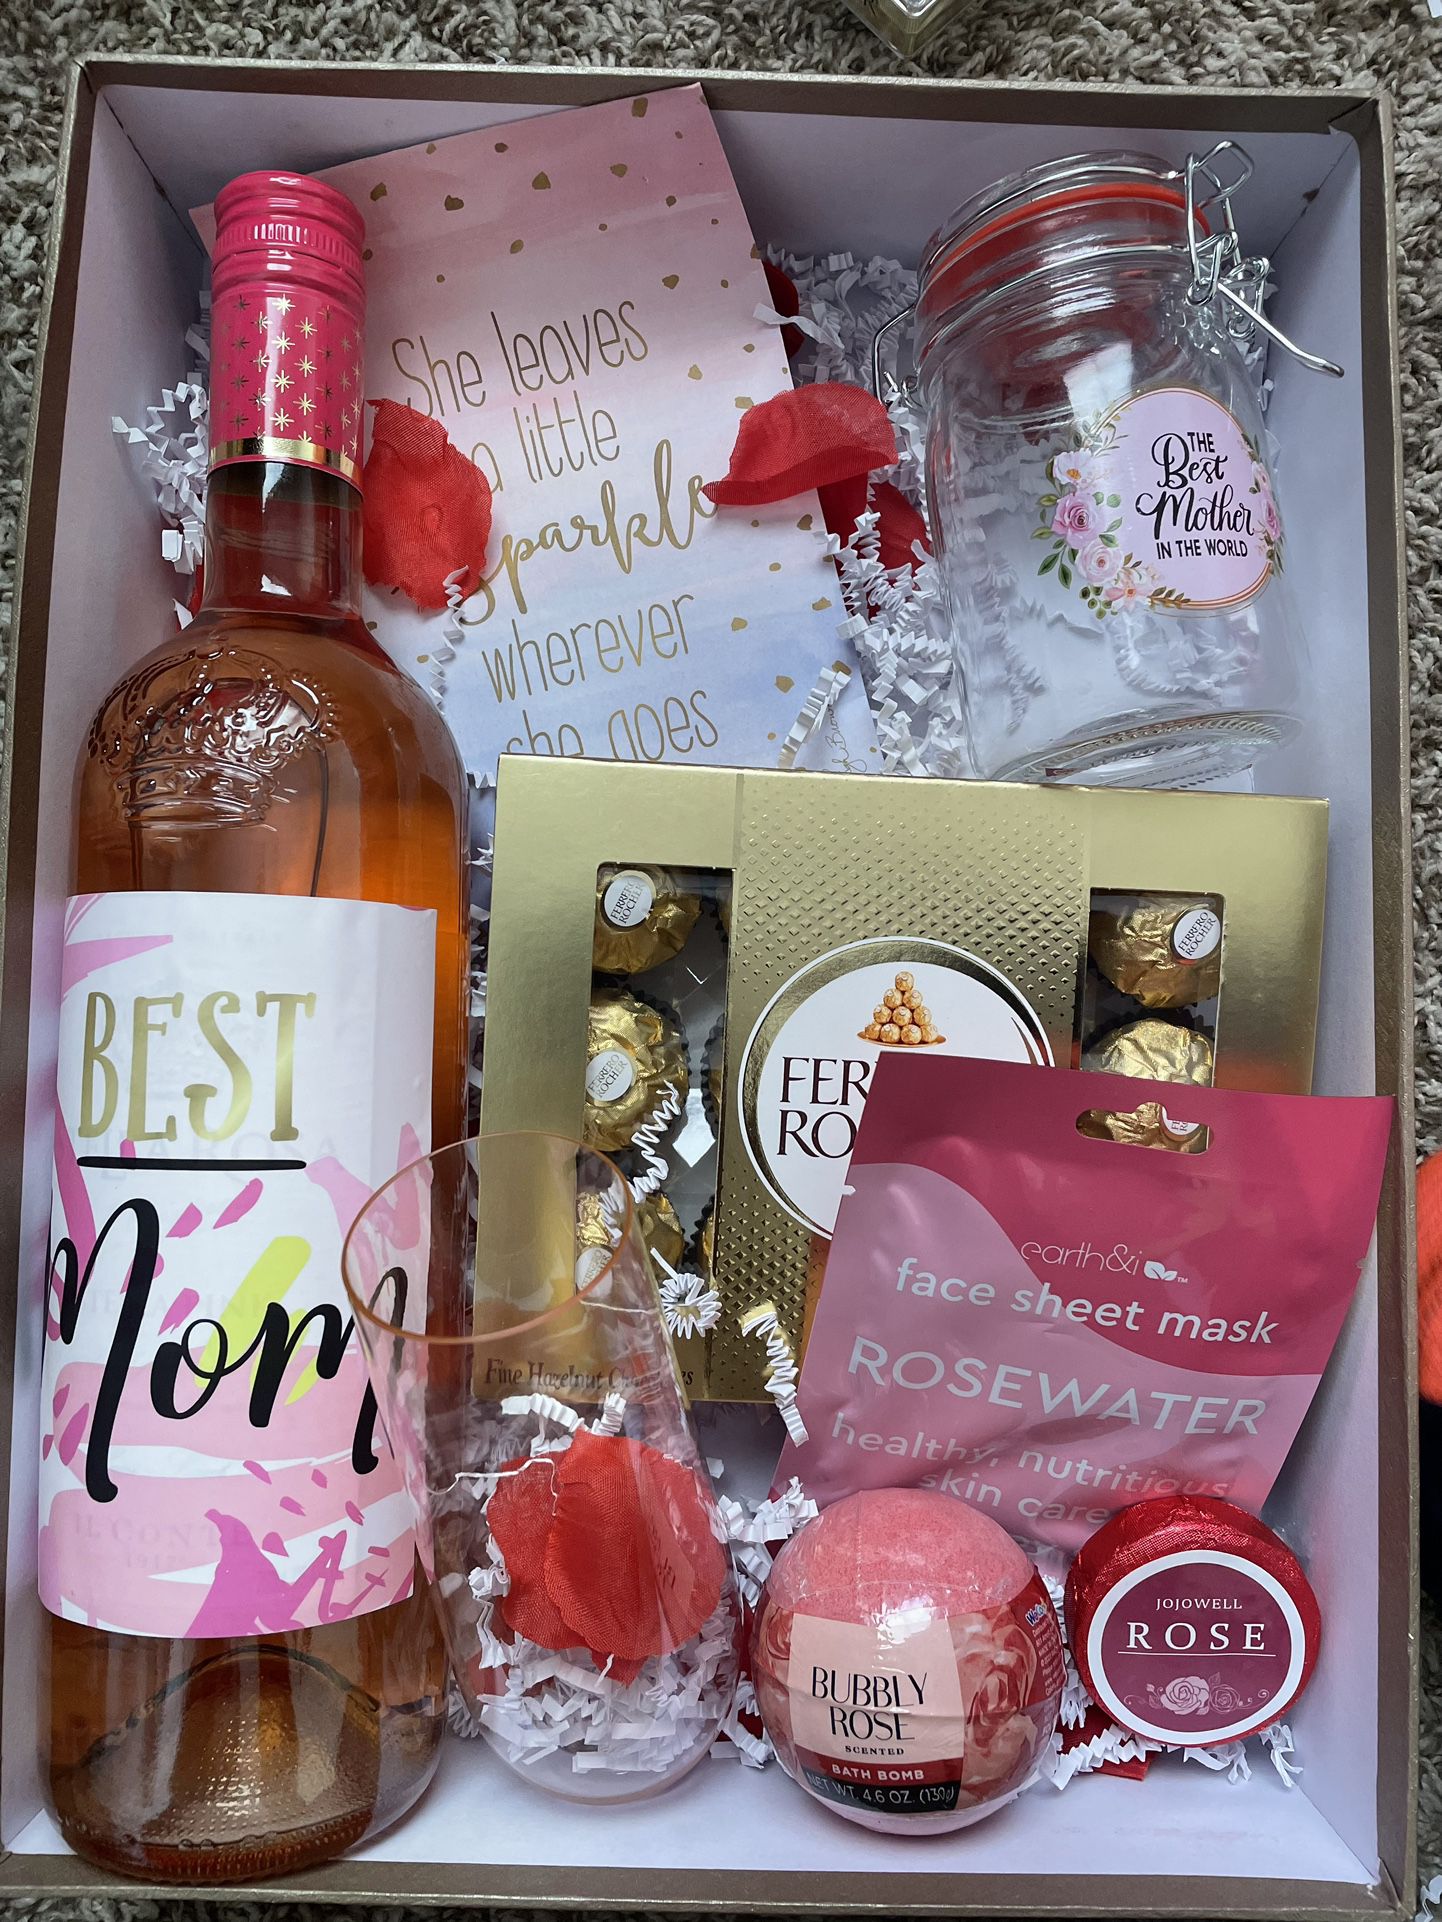 Mothers Day Basket